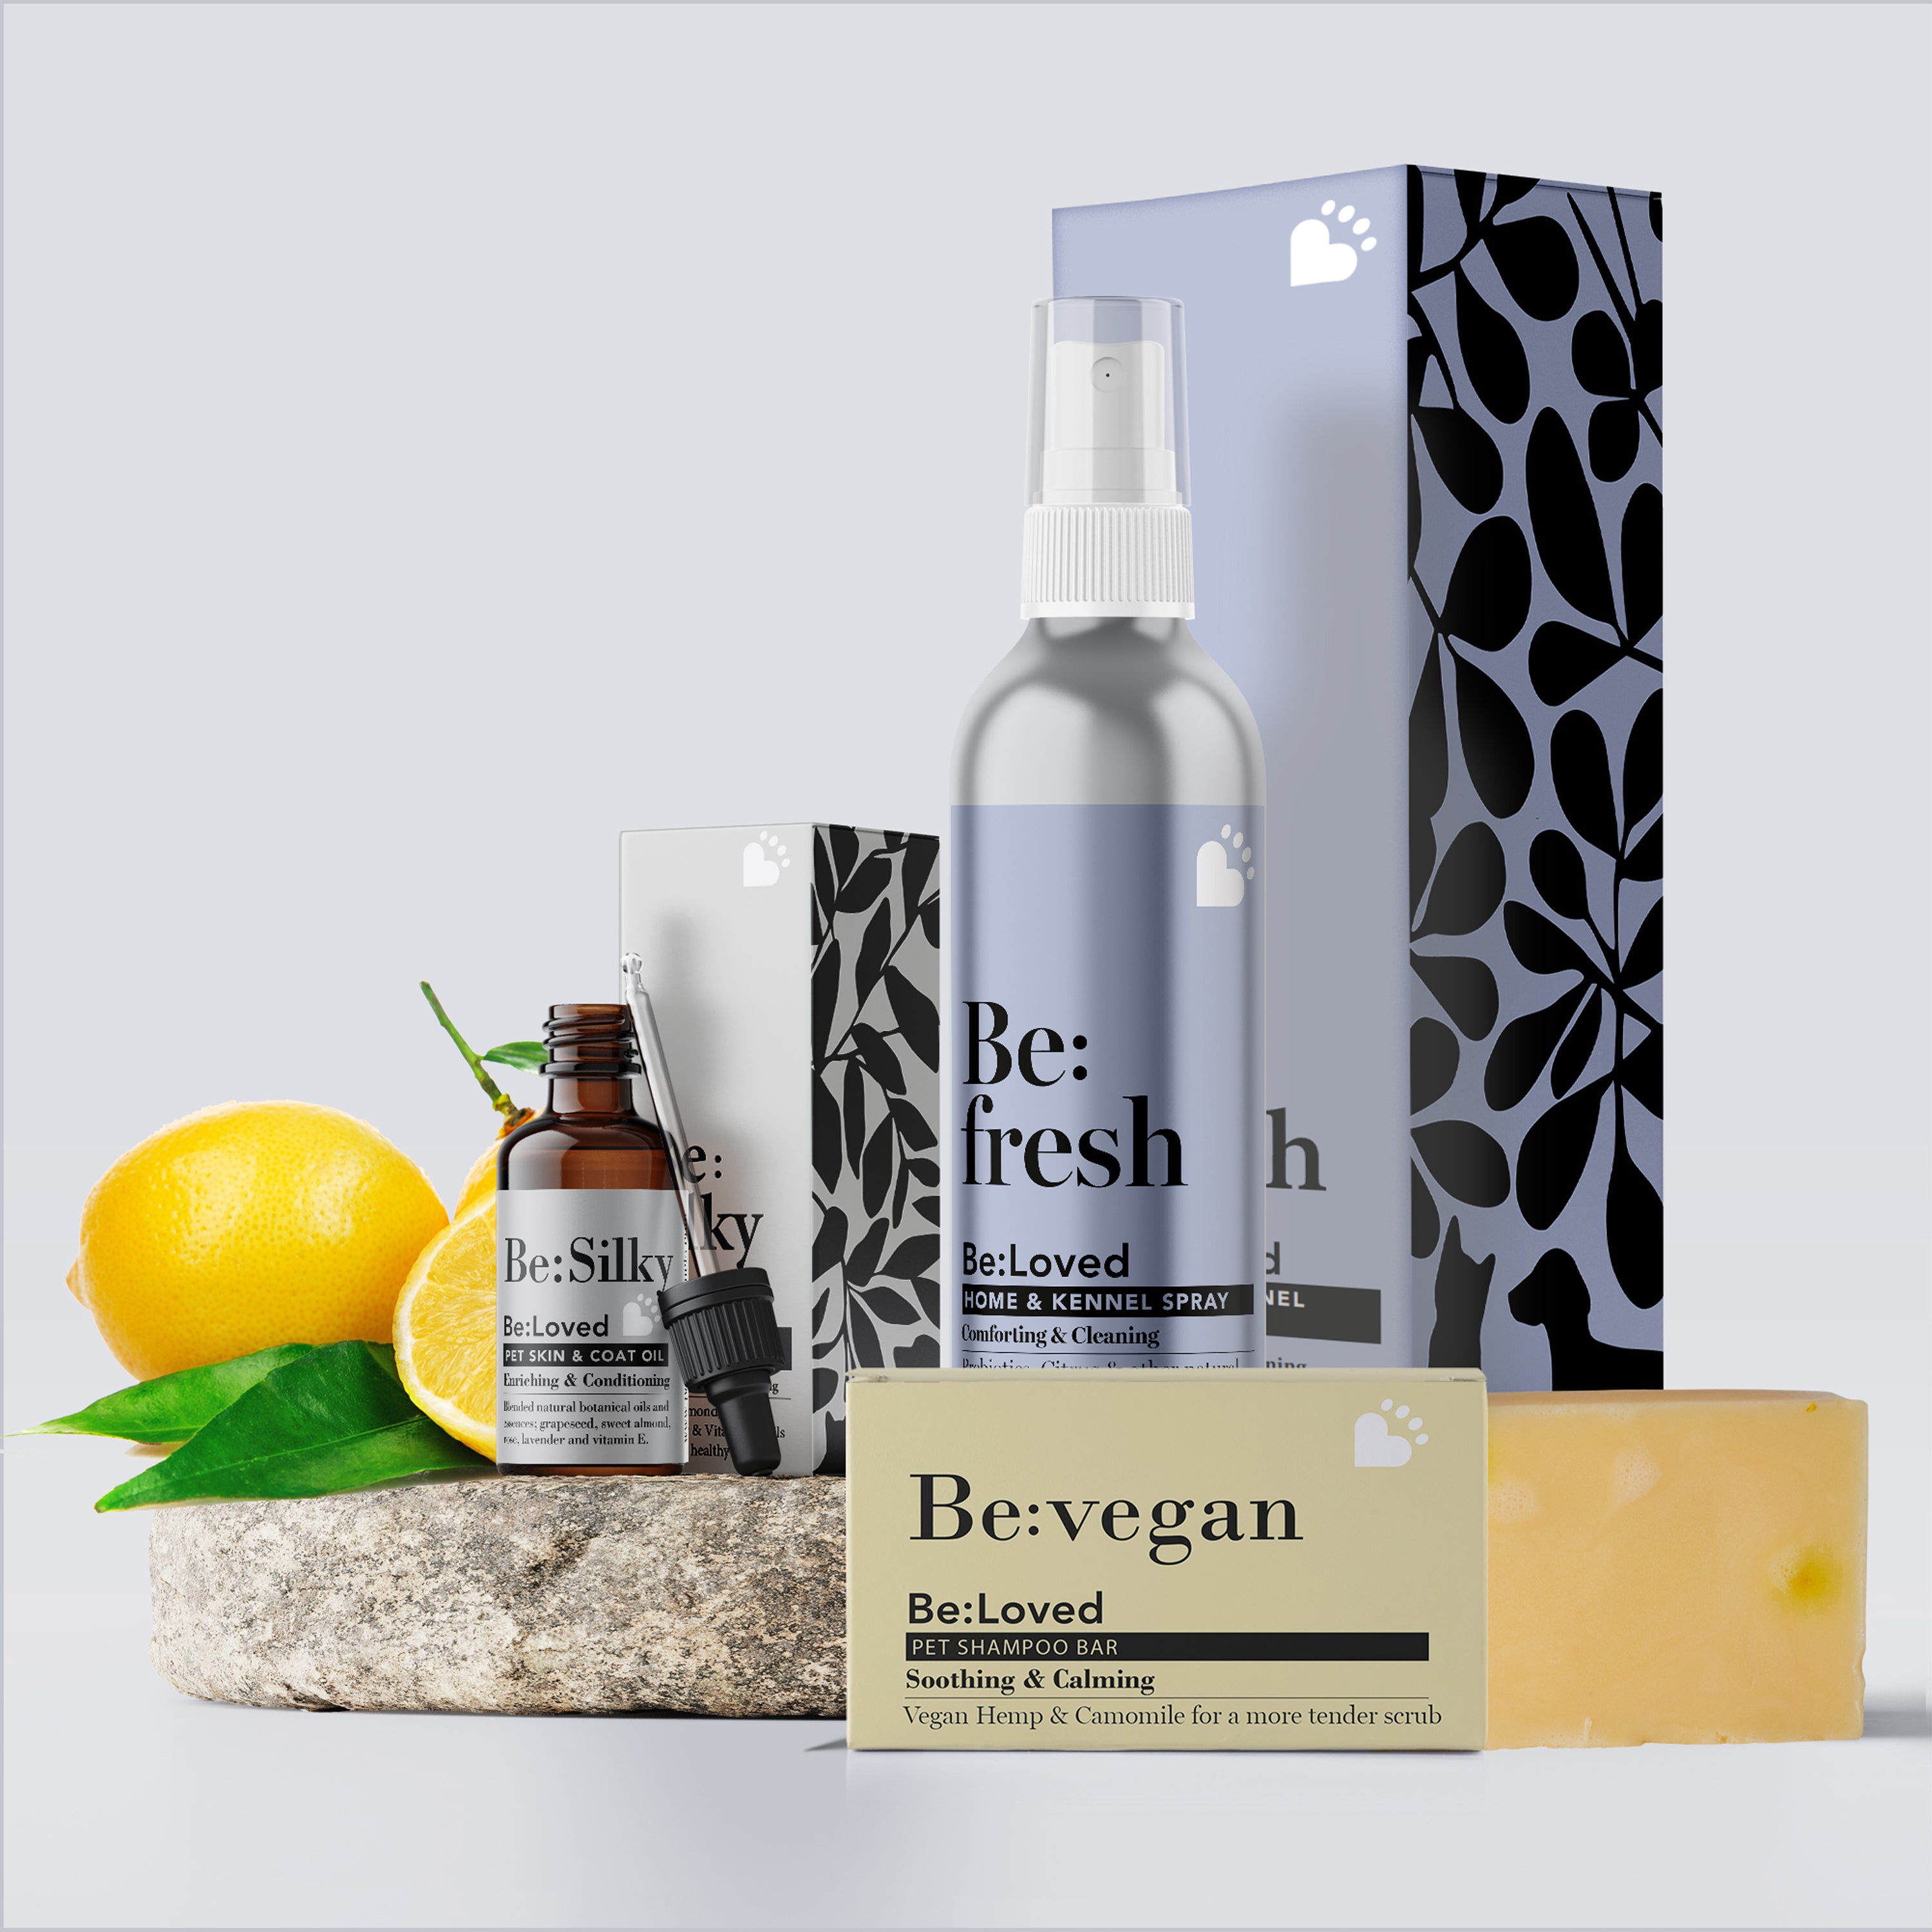 Be:vegan bundle of product images, including 3 products with their packaging and some lemons.